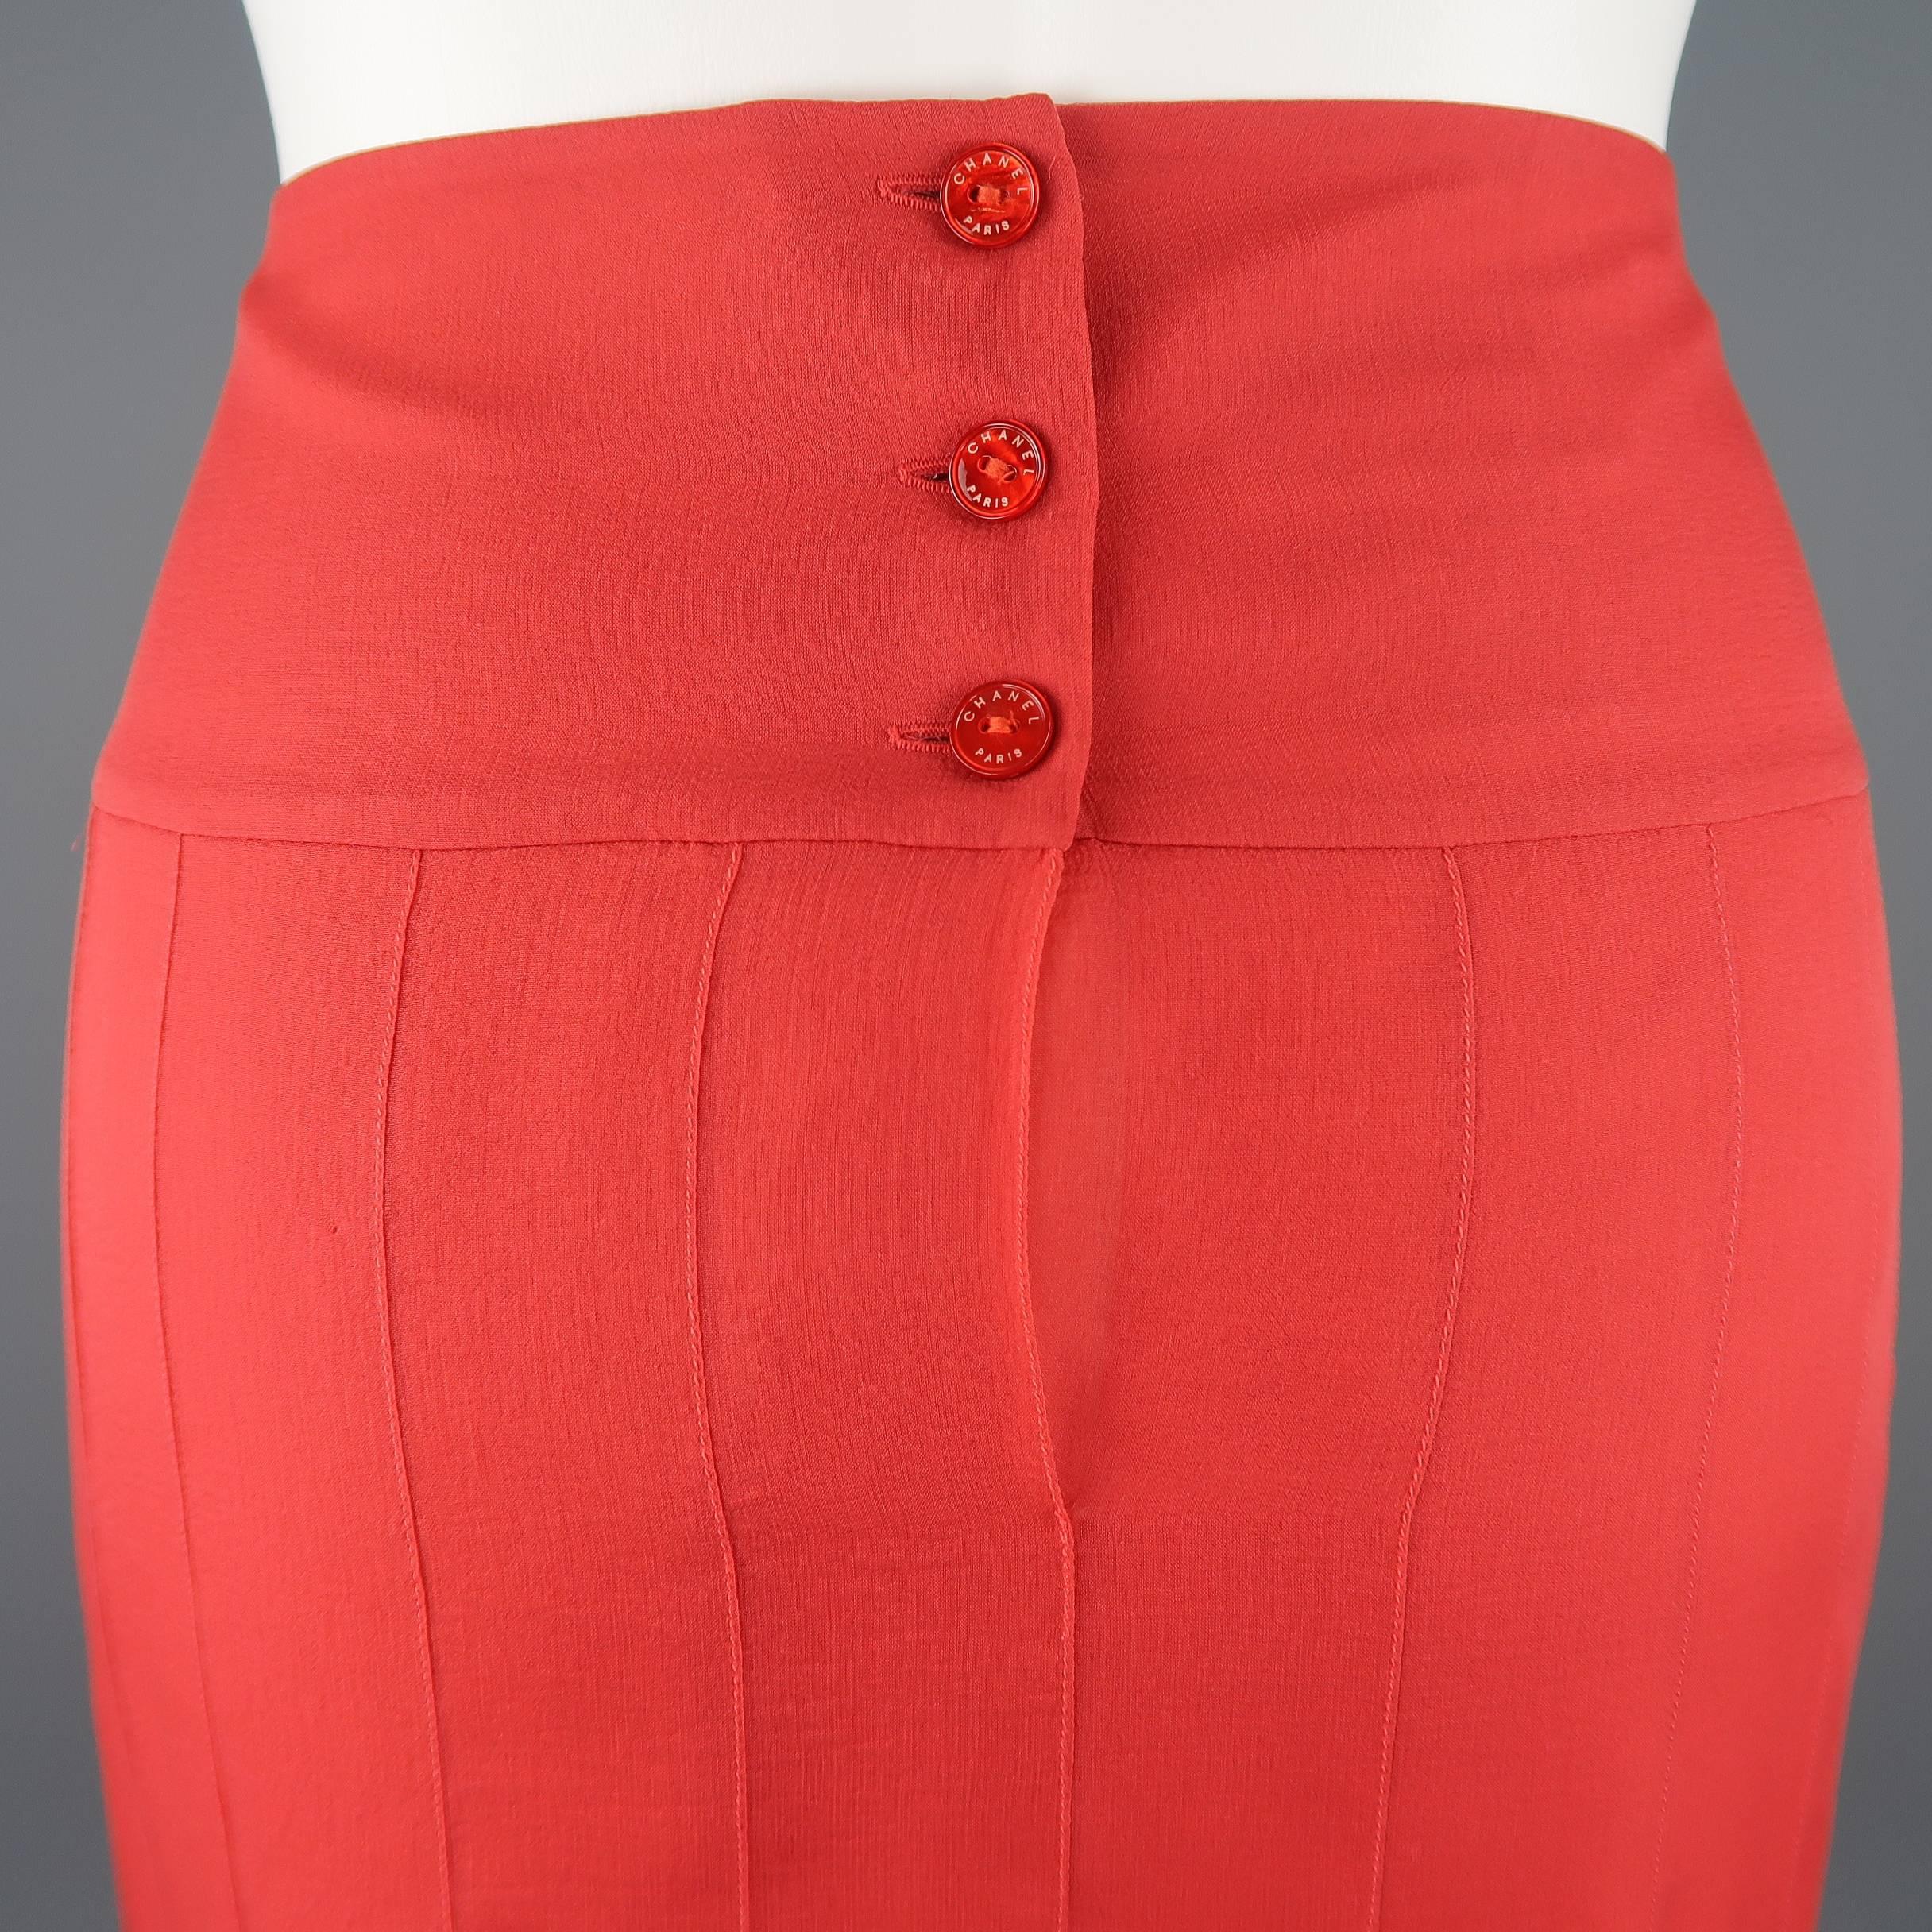 CHANEL Size 8 Red Silk Chiffon Pleated Pencil Skirt 1